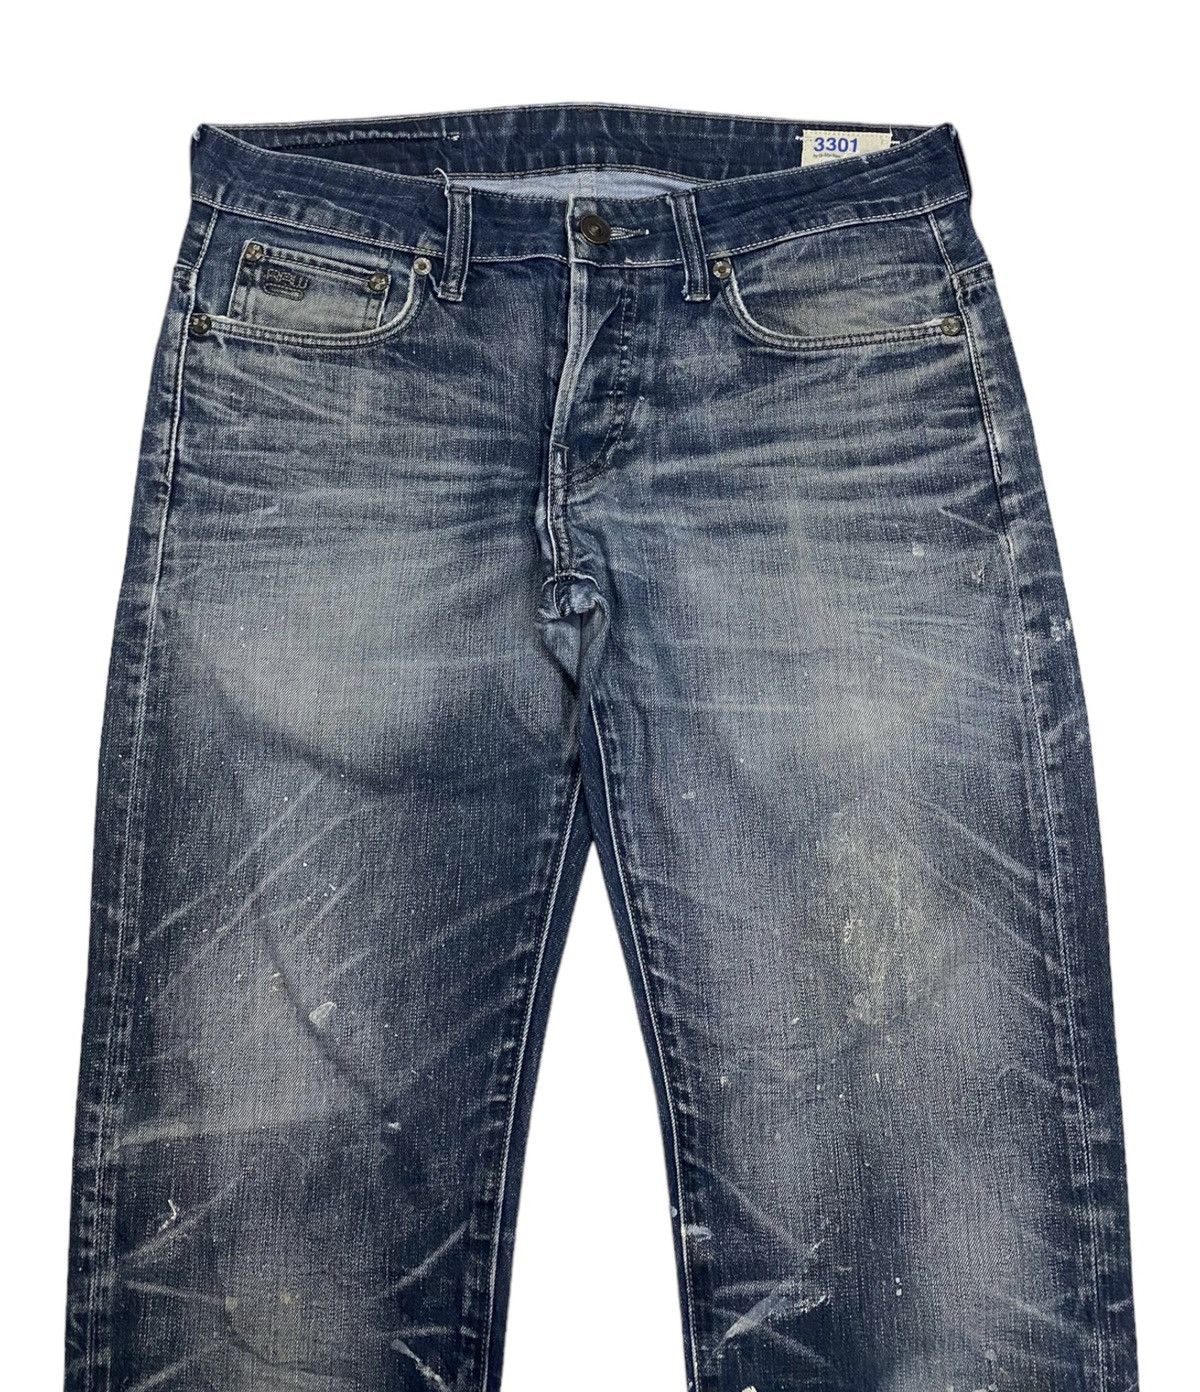 Archival Clothing - G-STAR RAW DISTRESSED PAINTED 3301 UNDERCOVER STYLE JEANS - 5